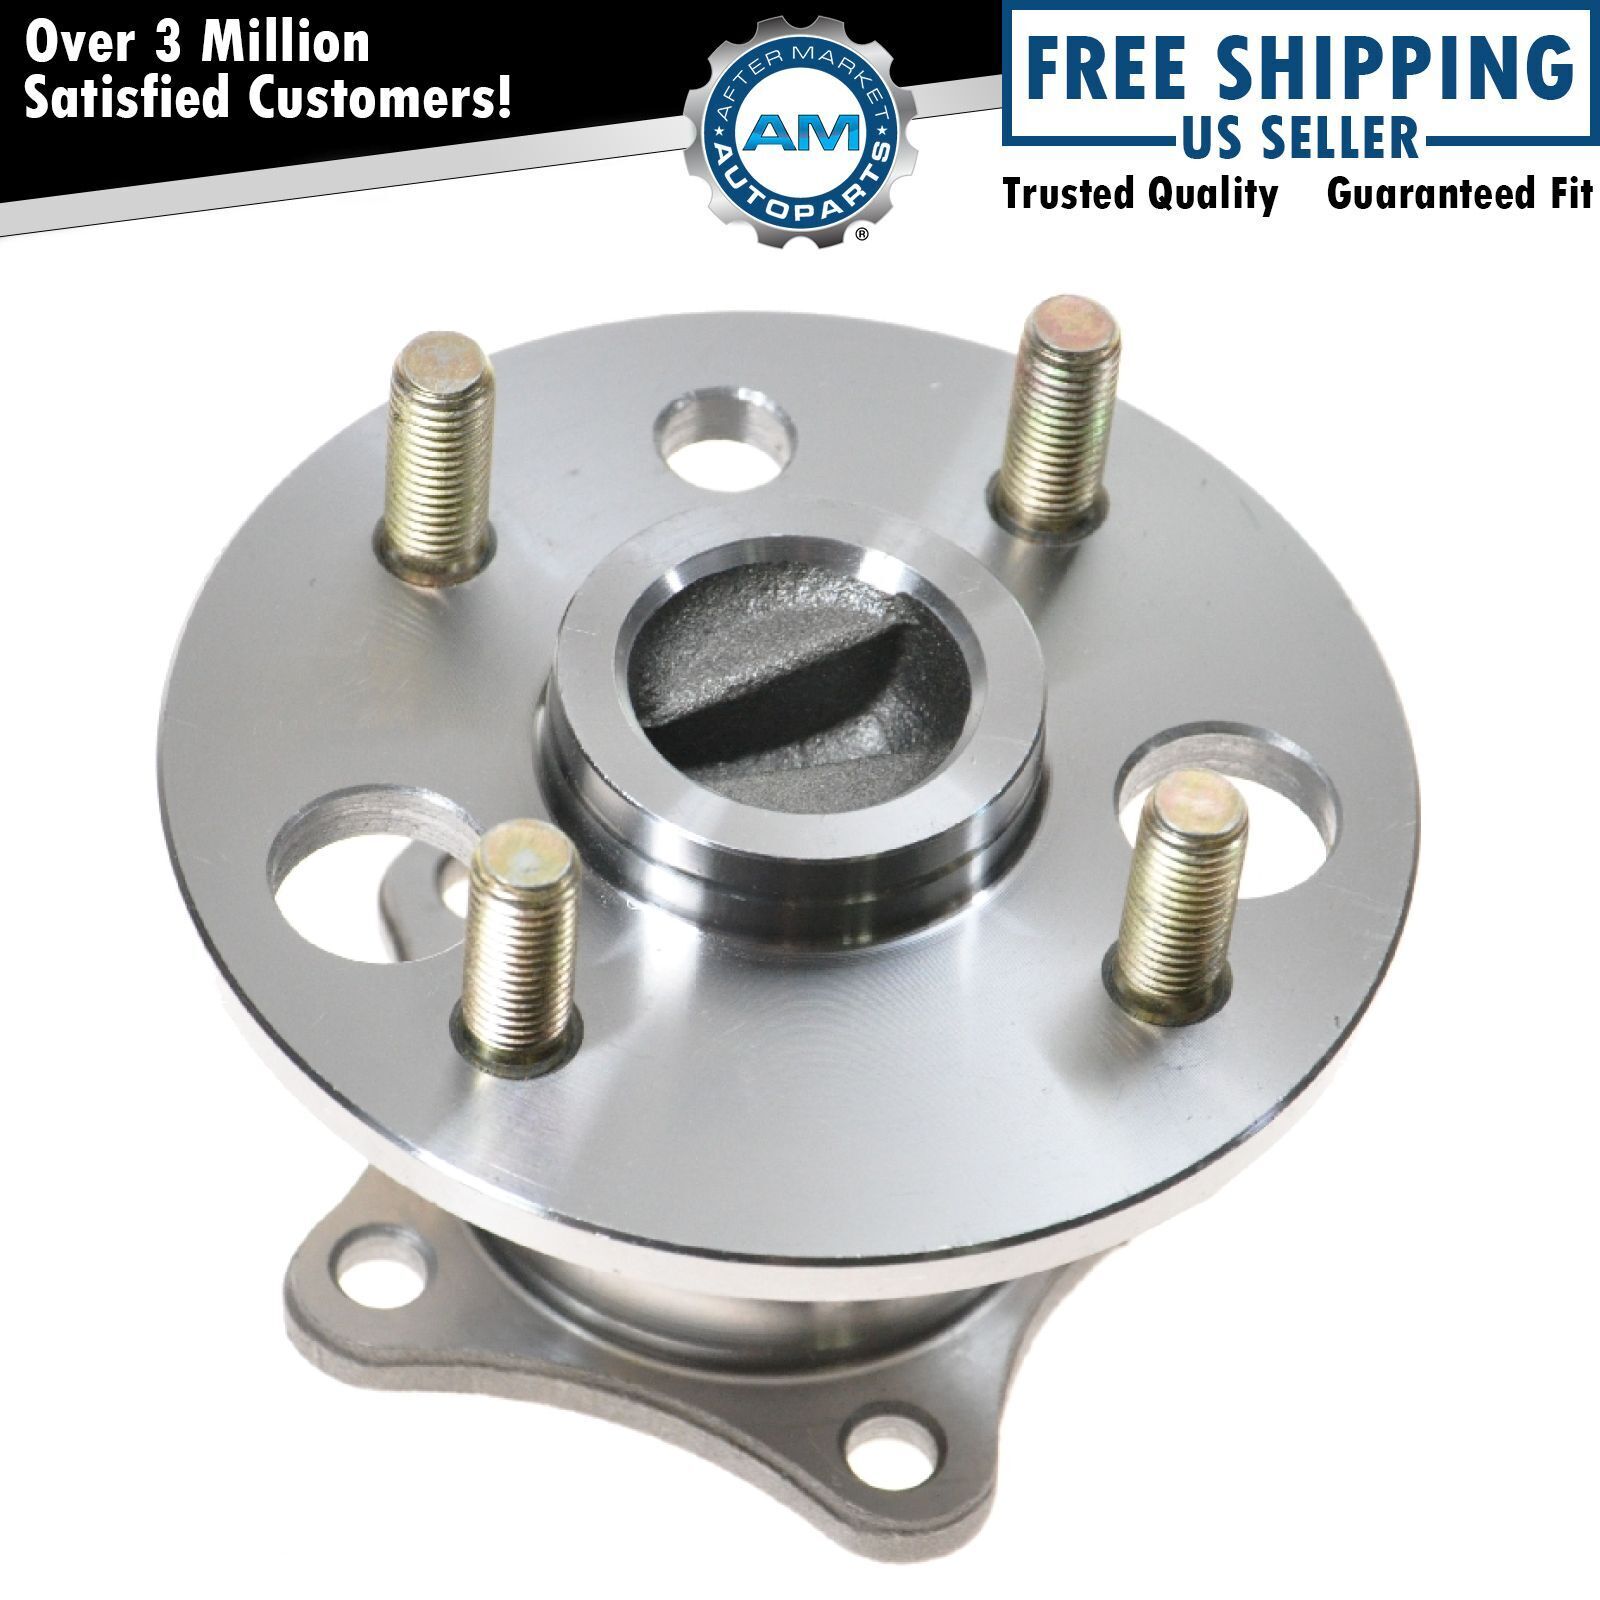 Rear Wheel Hub & Bearing Assembly for Toyota Corolla Chevy Geo Prizm w/ ABS